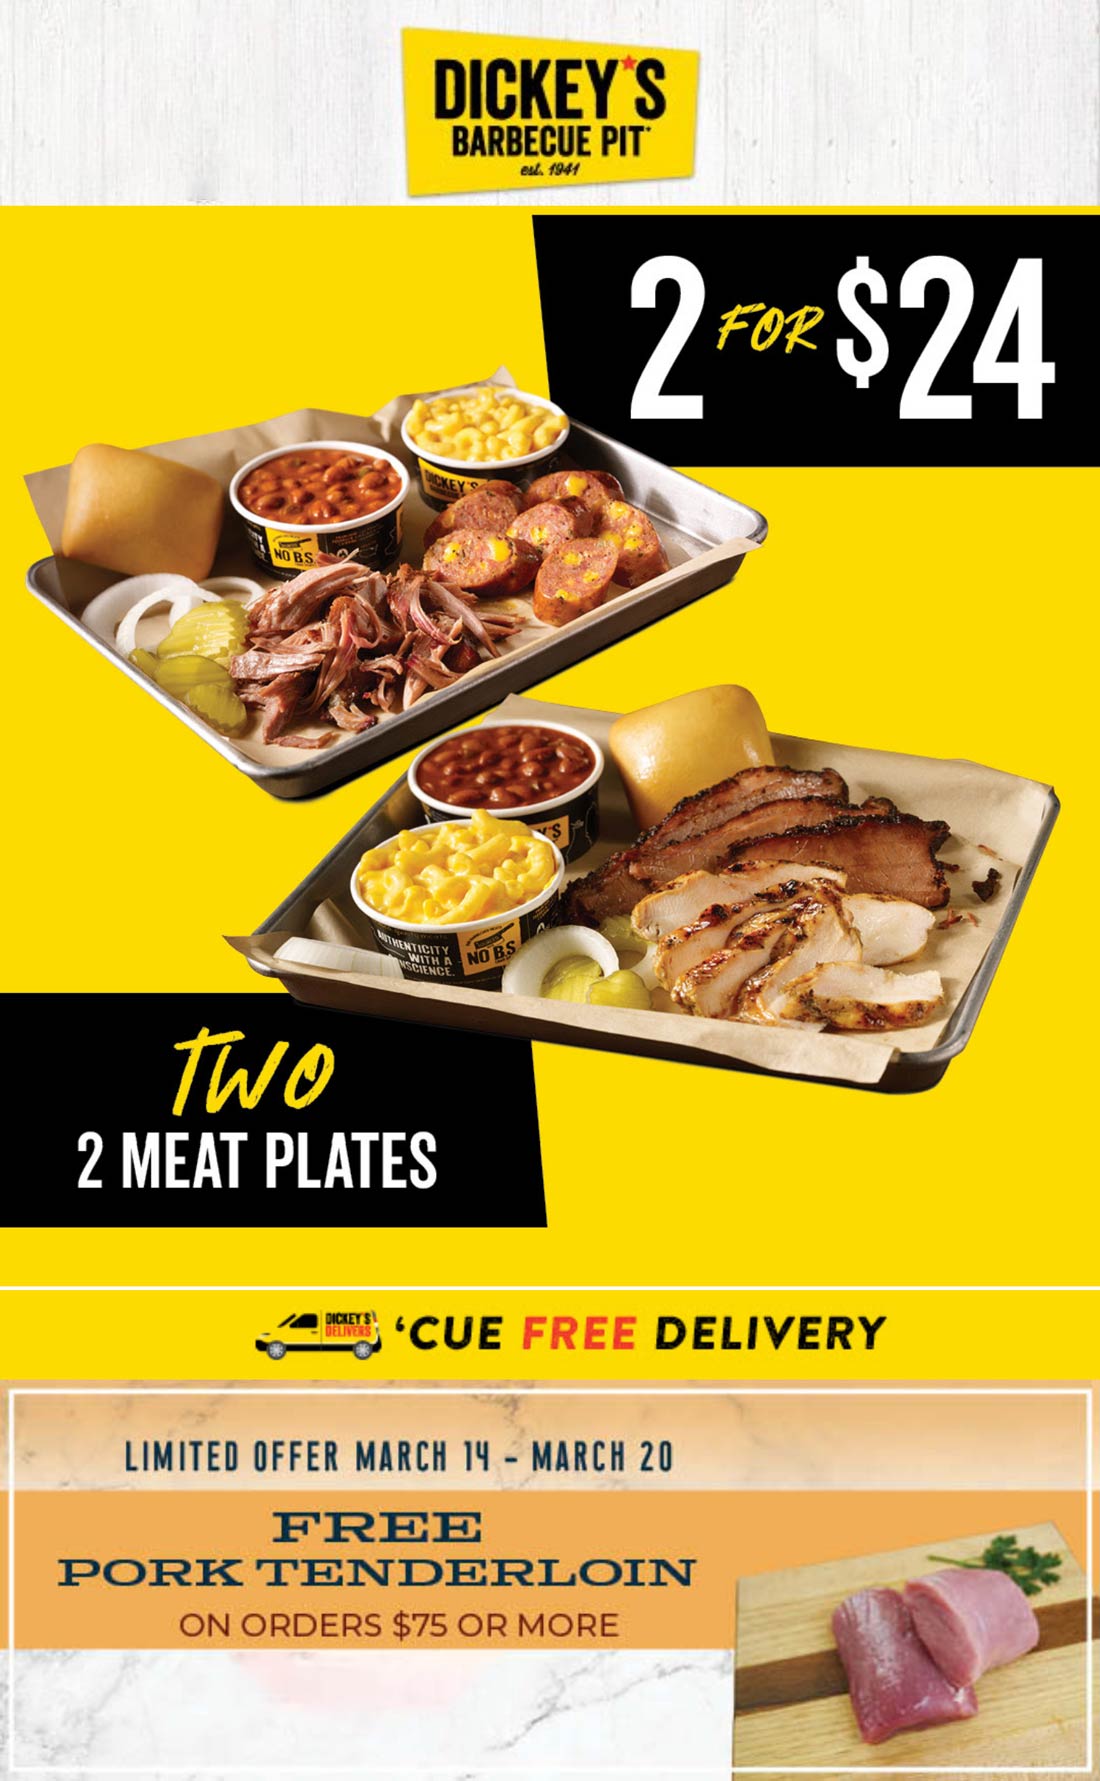 Dickeys Barbecue Pit stores Coupon  2 meat plates for $24 & free tenderloin on $75 at Dickeys Barbecue Pit #dickeysbarbecuepit 